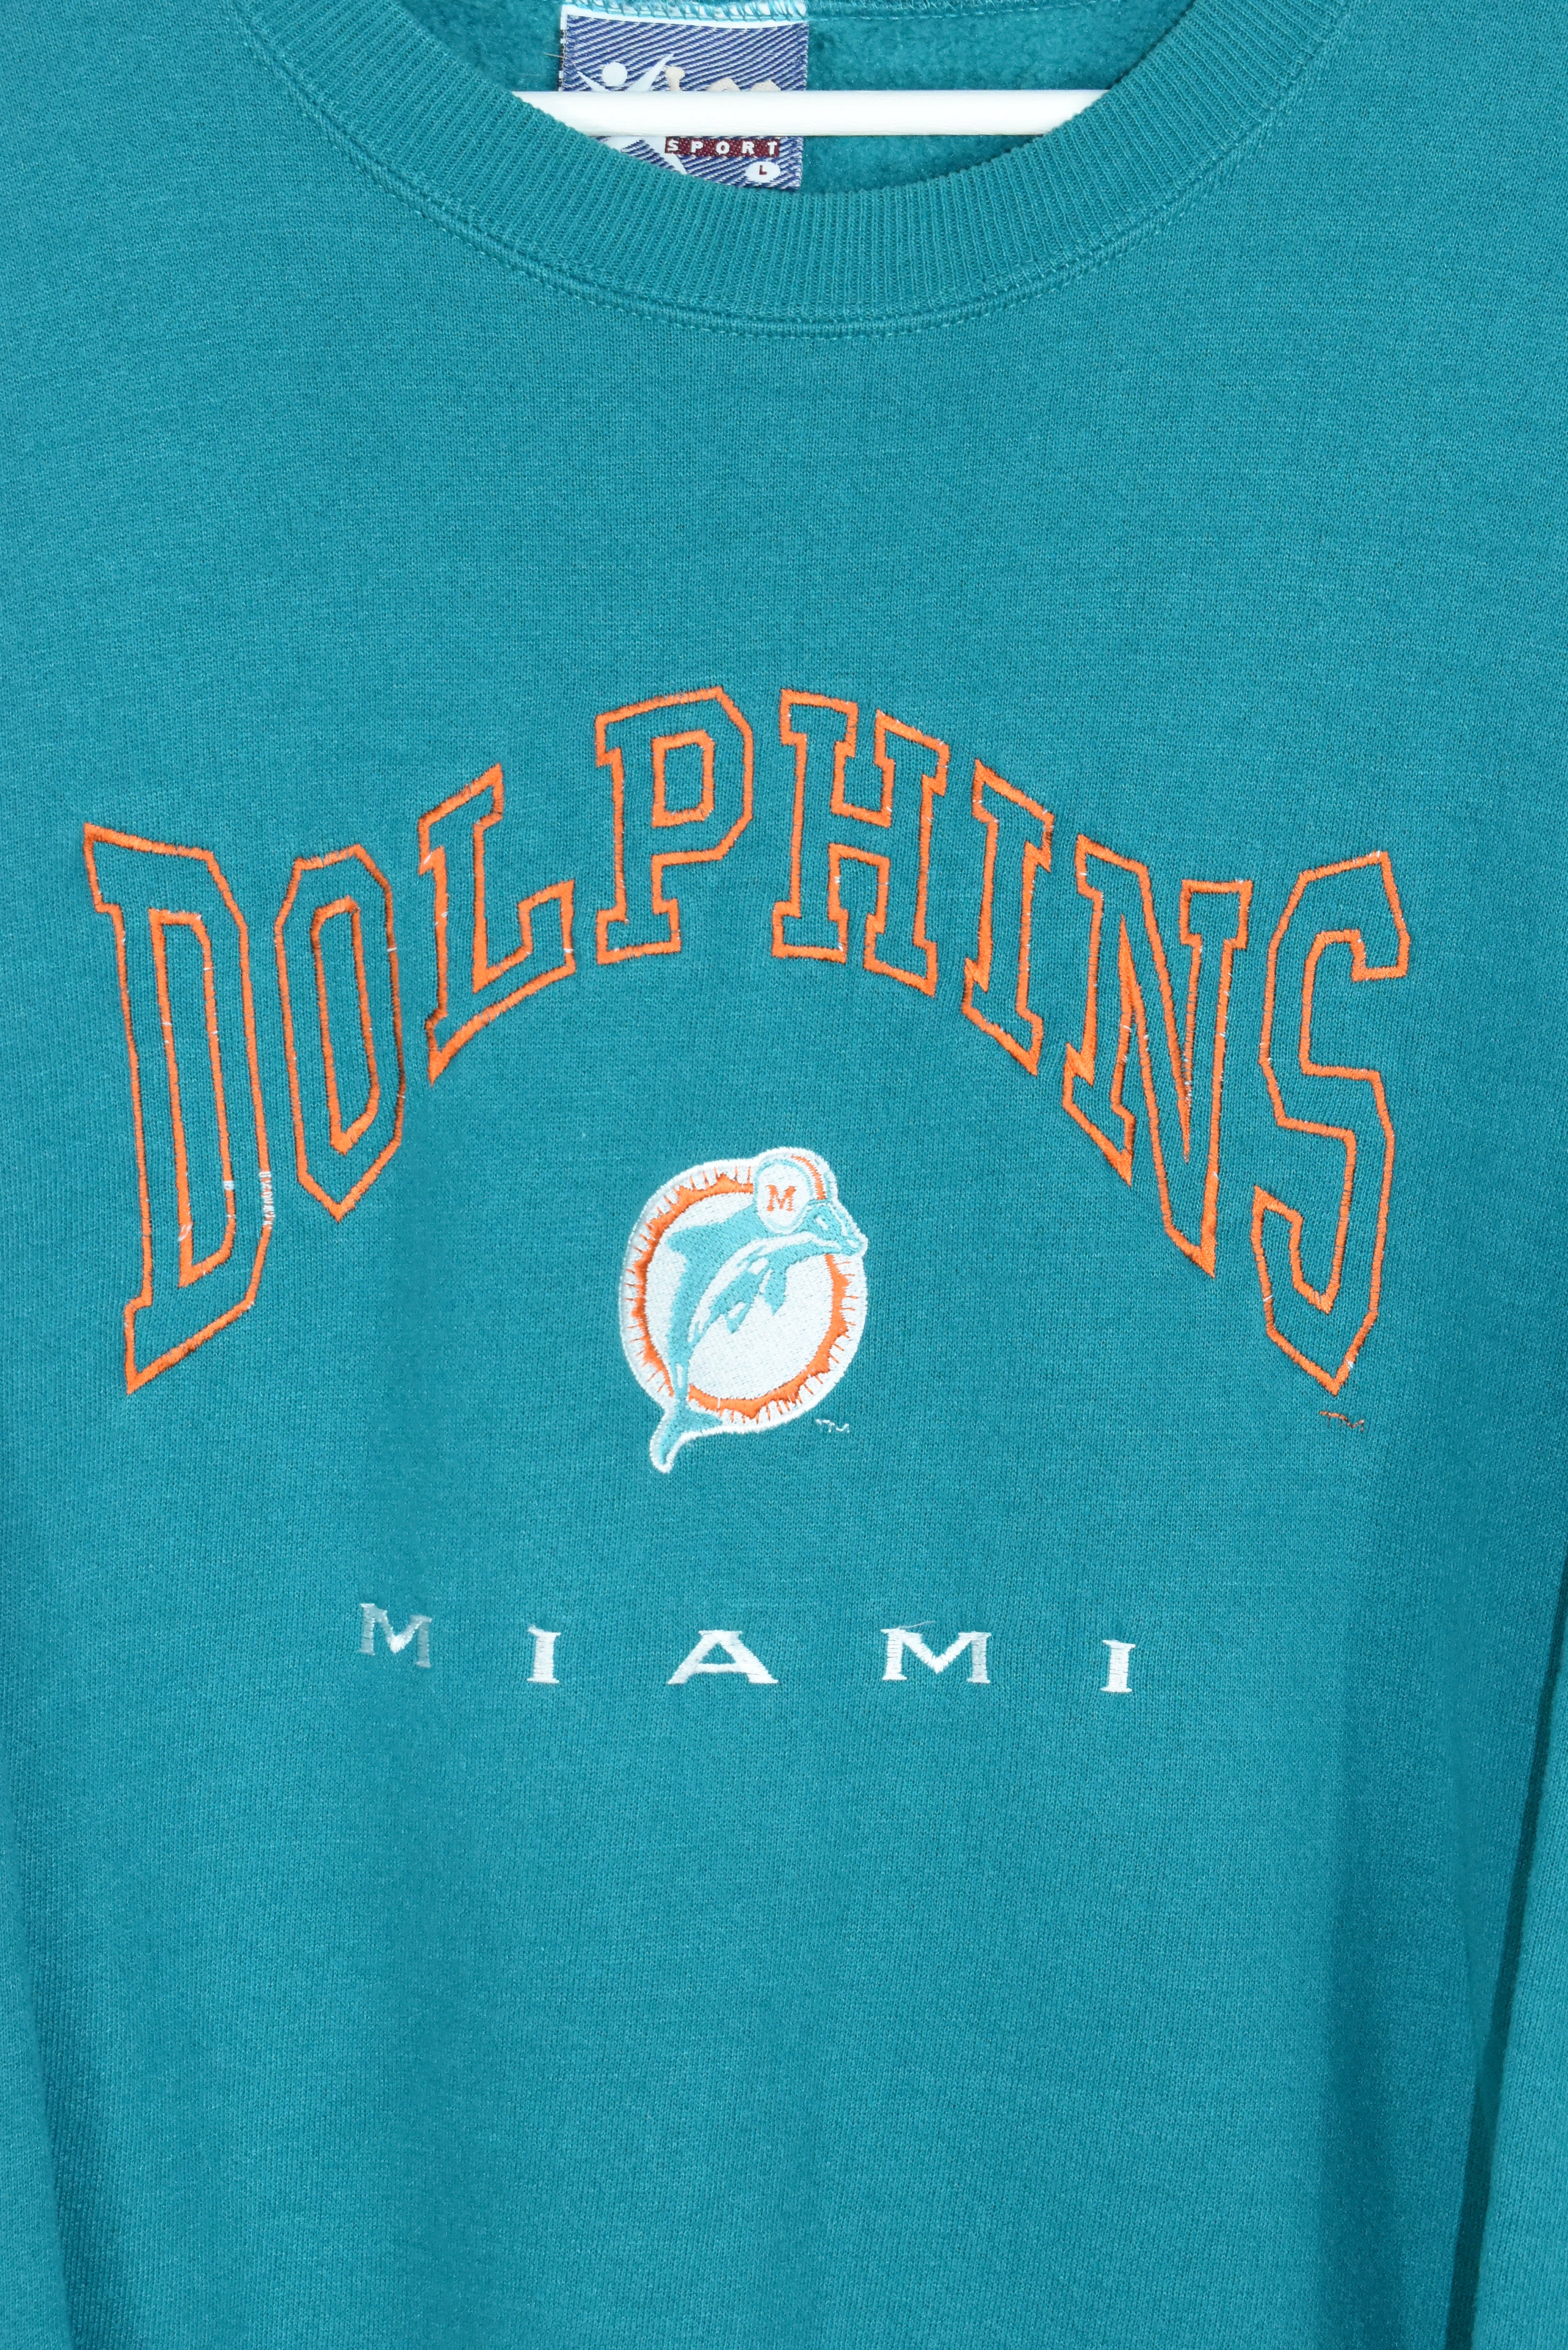 Vintage Lee Sport Miami Dolphins Embroidery Sweatshirt Large (Baggy)